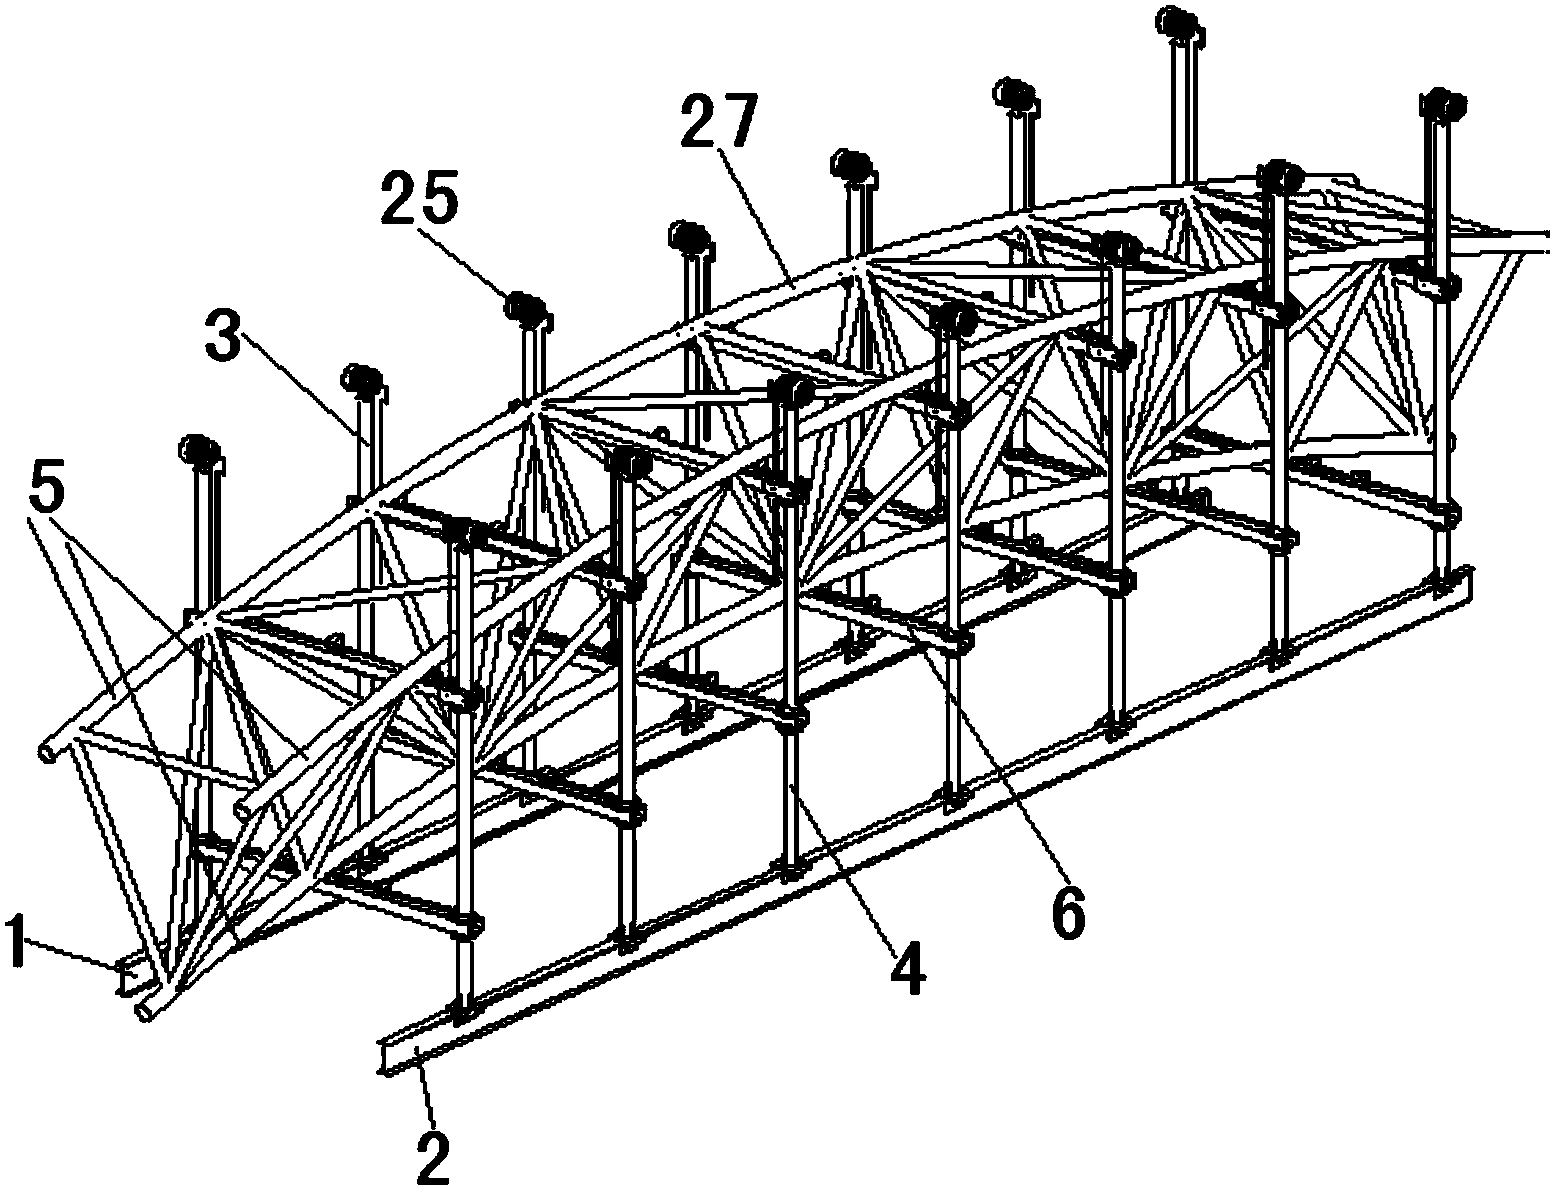 Jig frame structure for truss assembling and method for assembling truss with jig frame structure